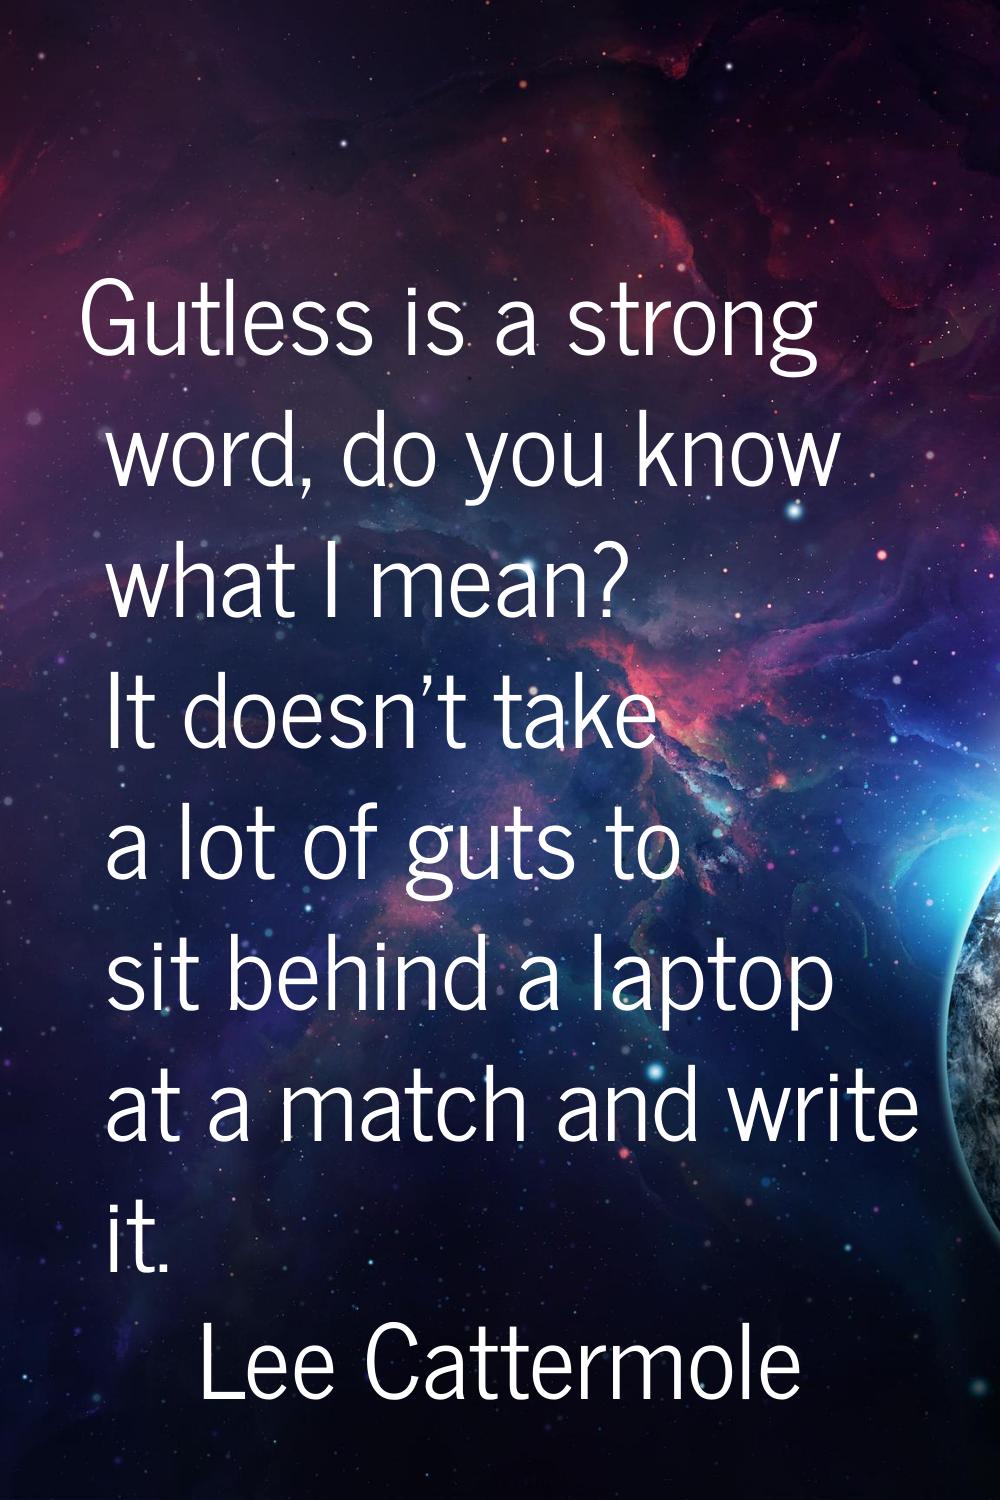 Gutless is a strong word, do you know what I mean? It doesn't take a lot of guts to sit behind a la